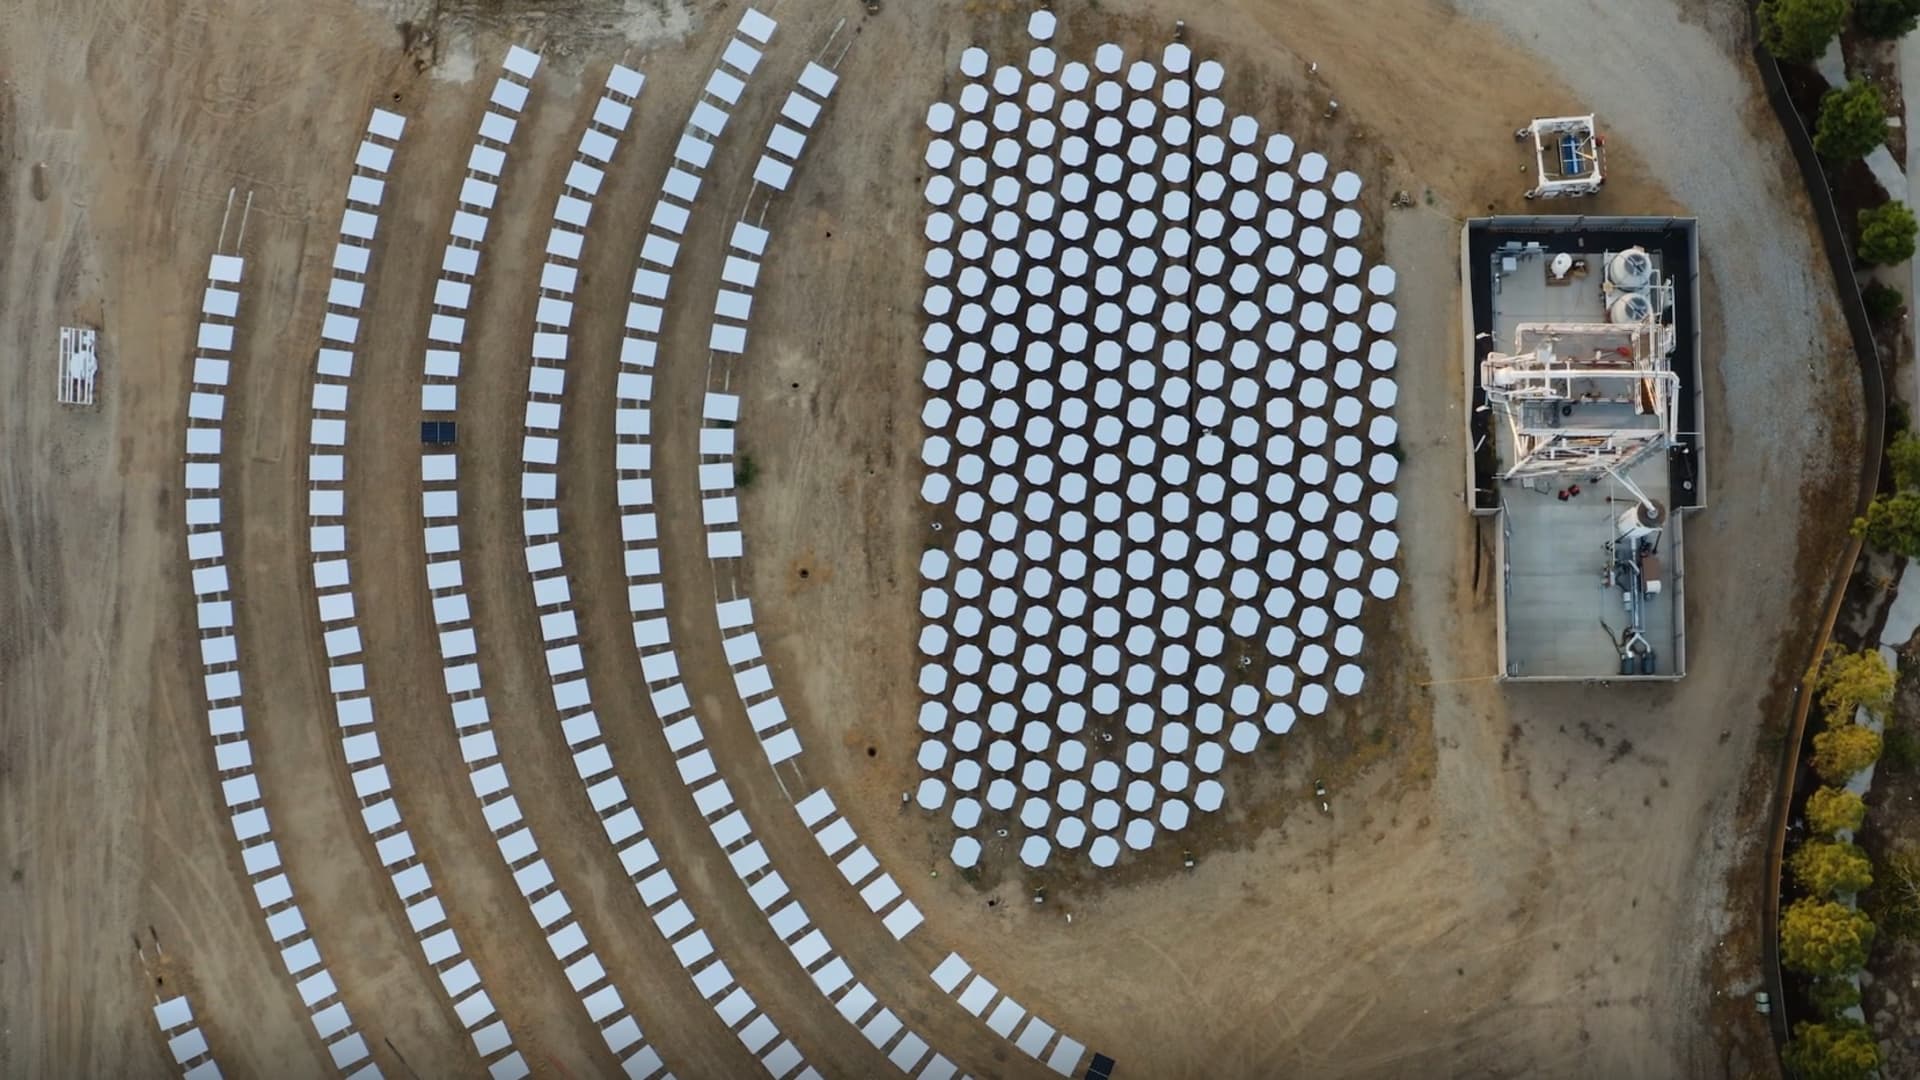 A bird's eye view of the concentrated solar technology Heliogen is working to build and commercialize. This is the demonstration project in Lancaster, Calif.